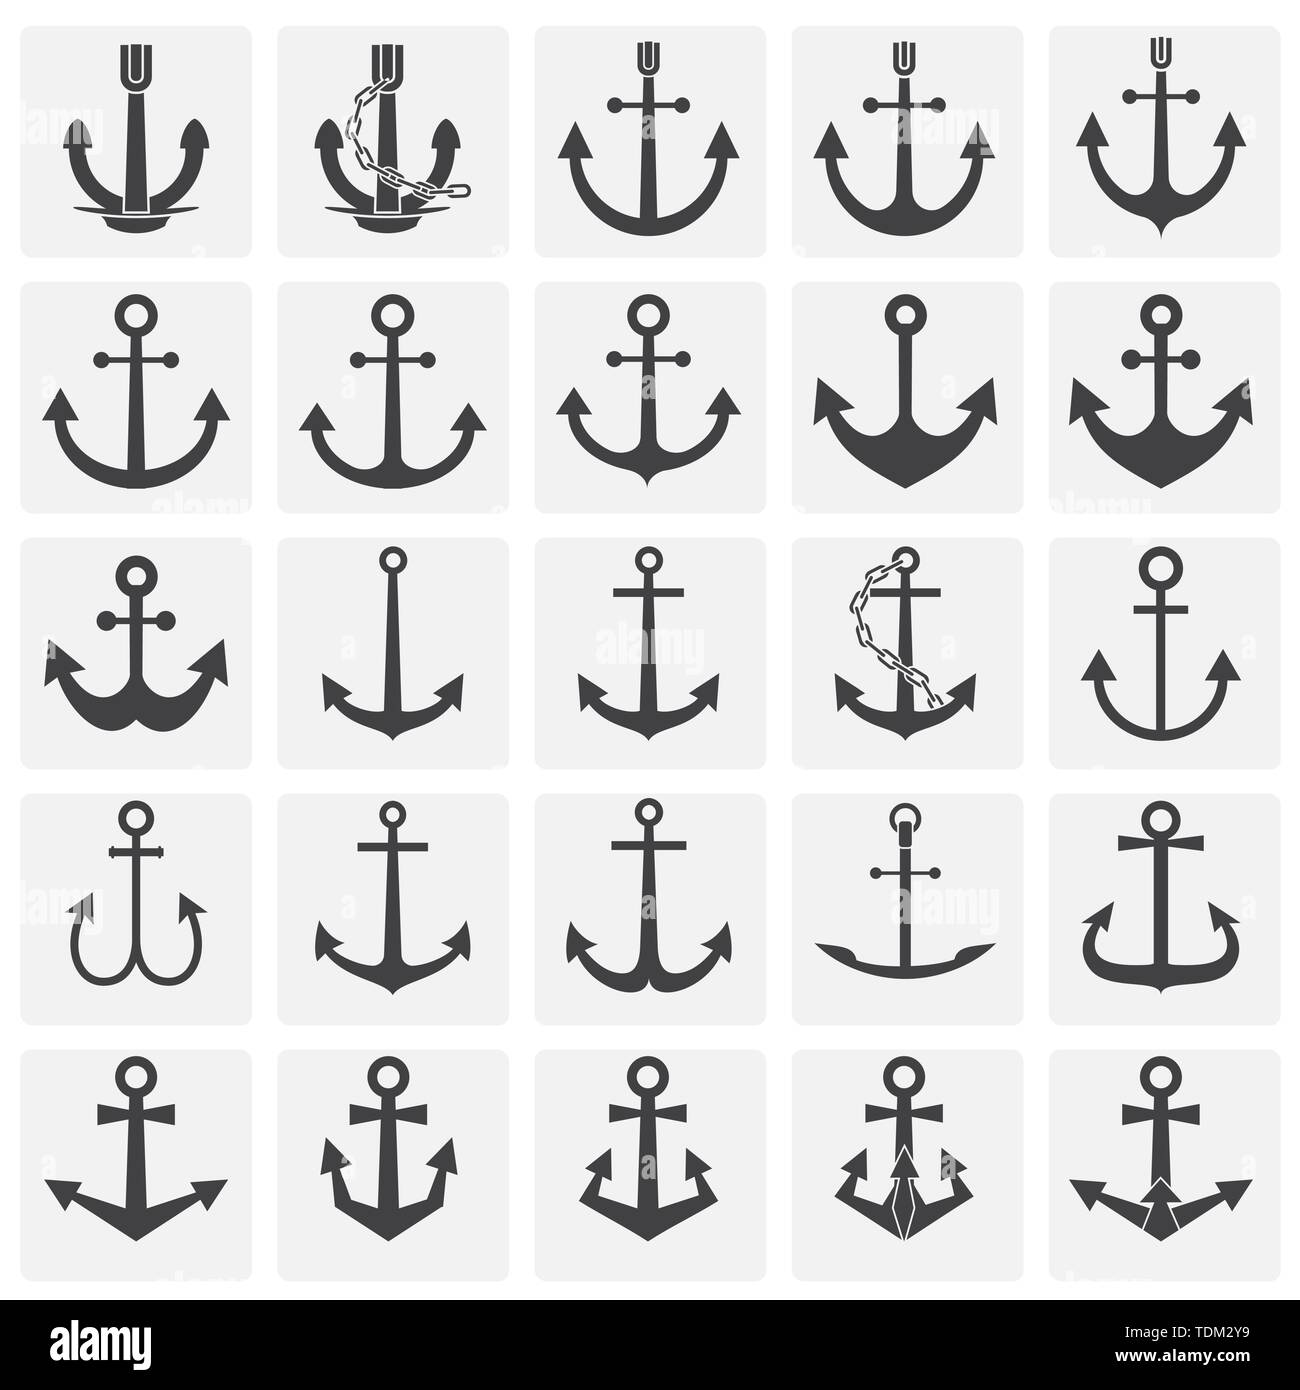 Anchor icons set on background for graphic and web design. Simple